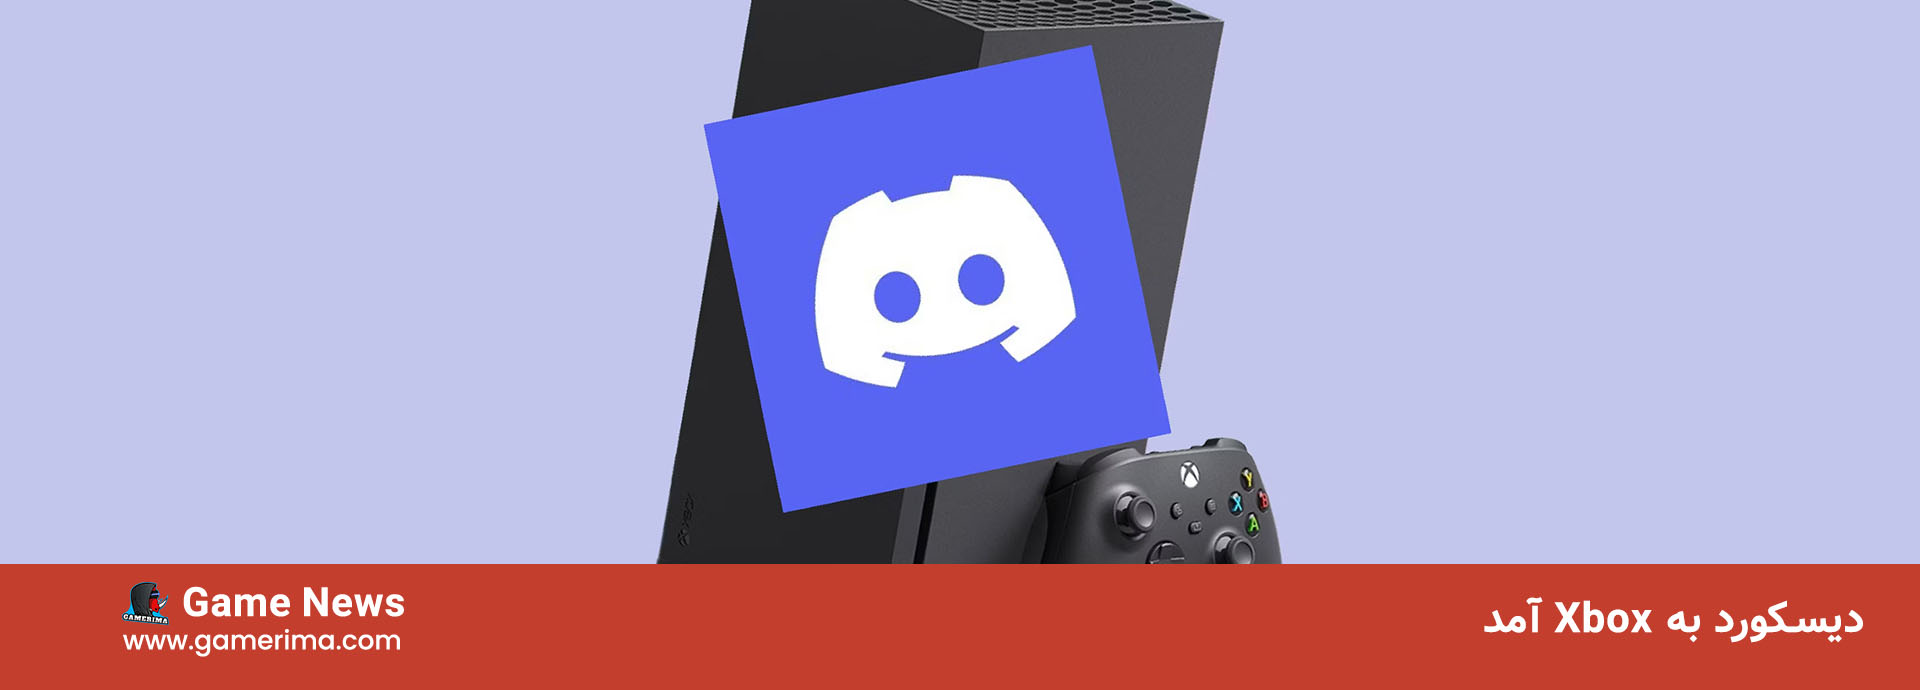 Discord Joined Xbox